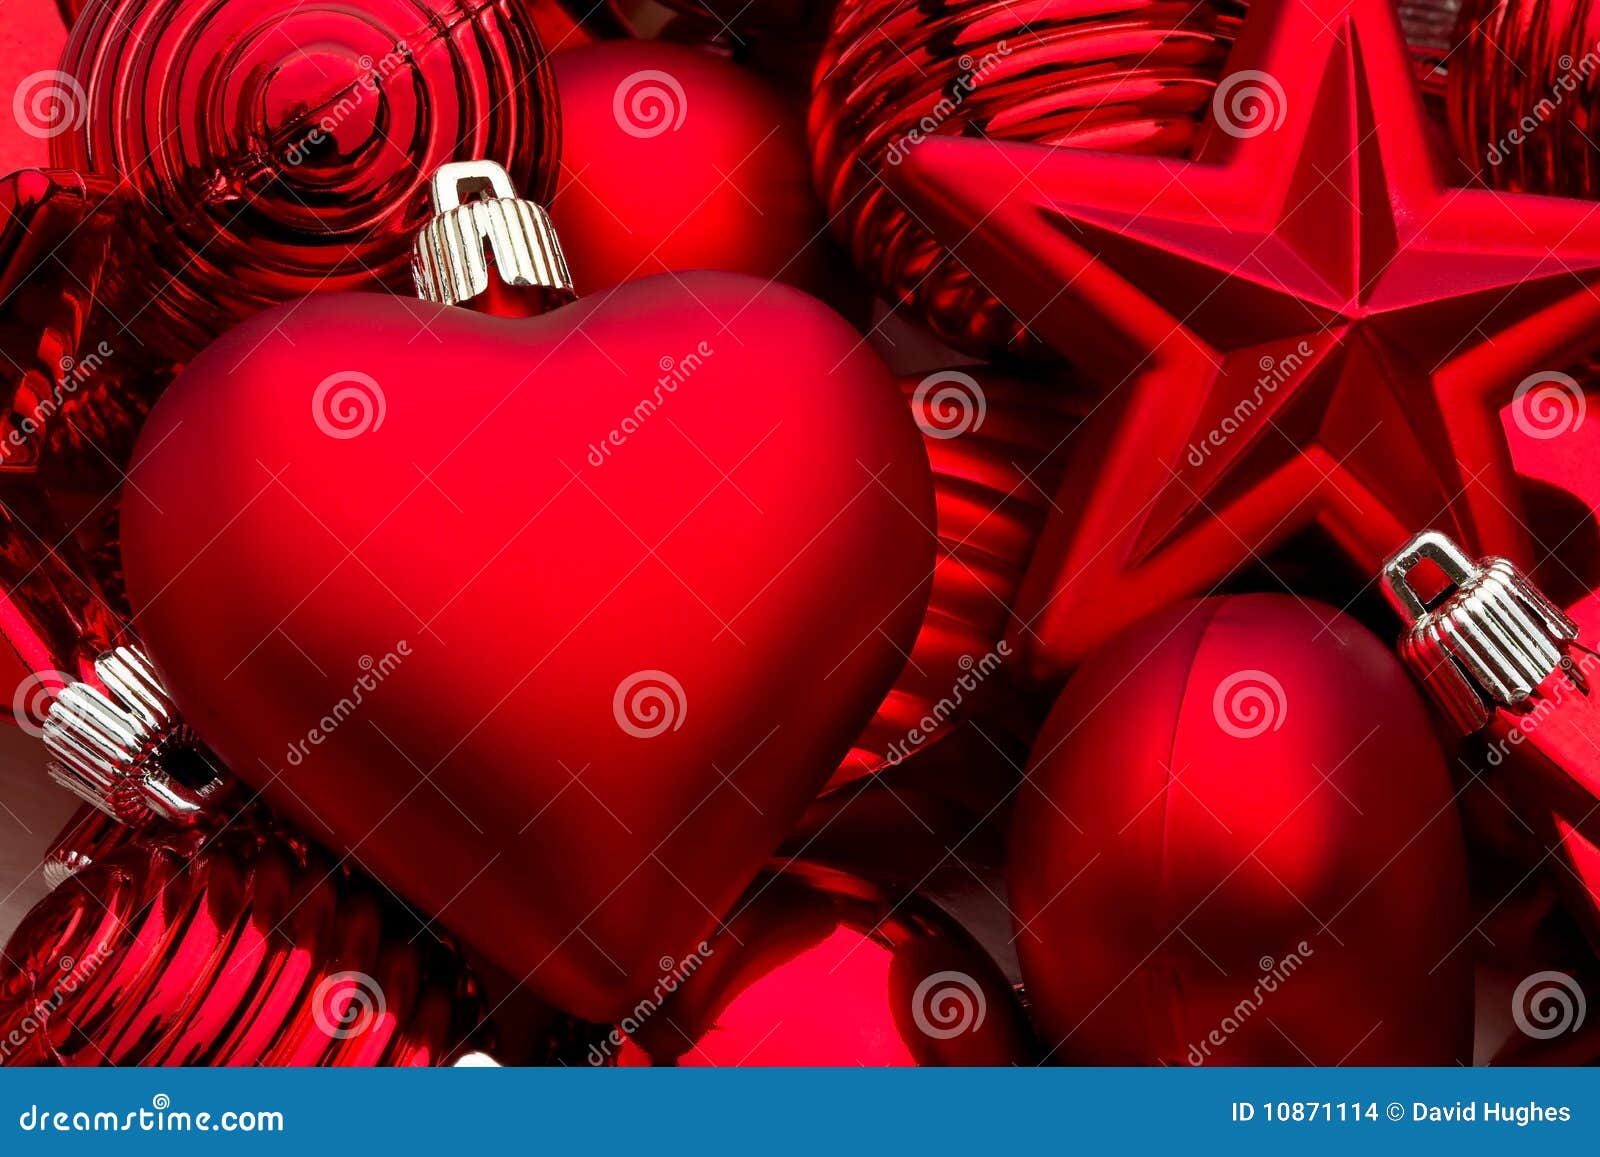 Lots Of Christmas Decorations Stock Images - Image: 10871114